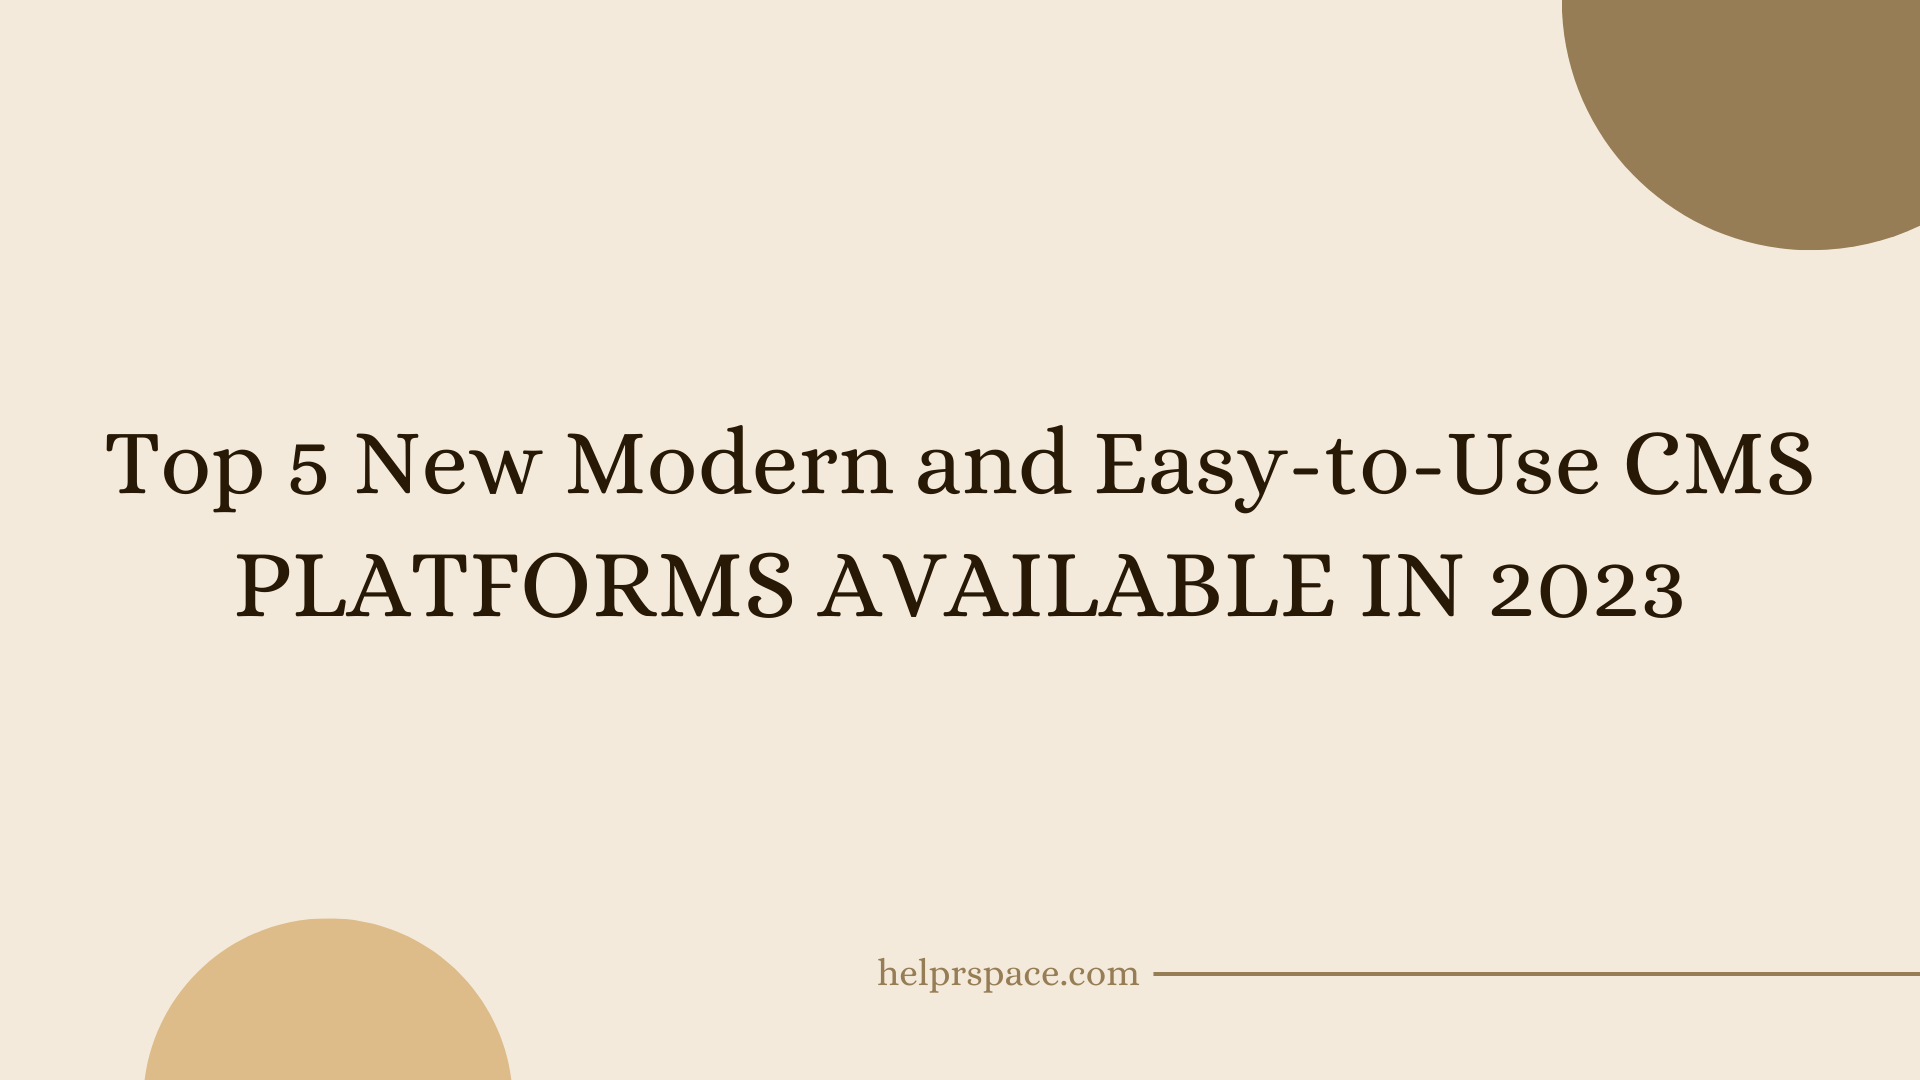 Top 5 New Modern and Easy-to-Use CMS Platforms Available in 2023